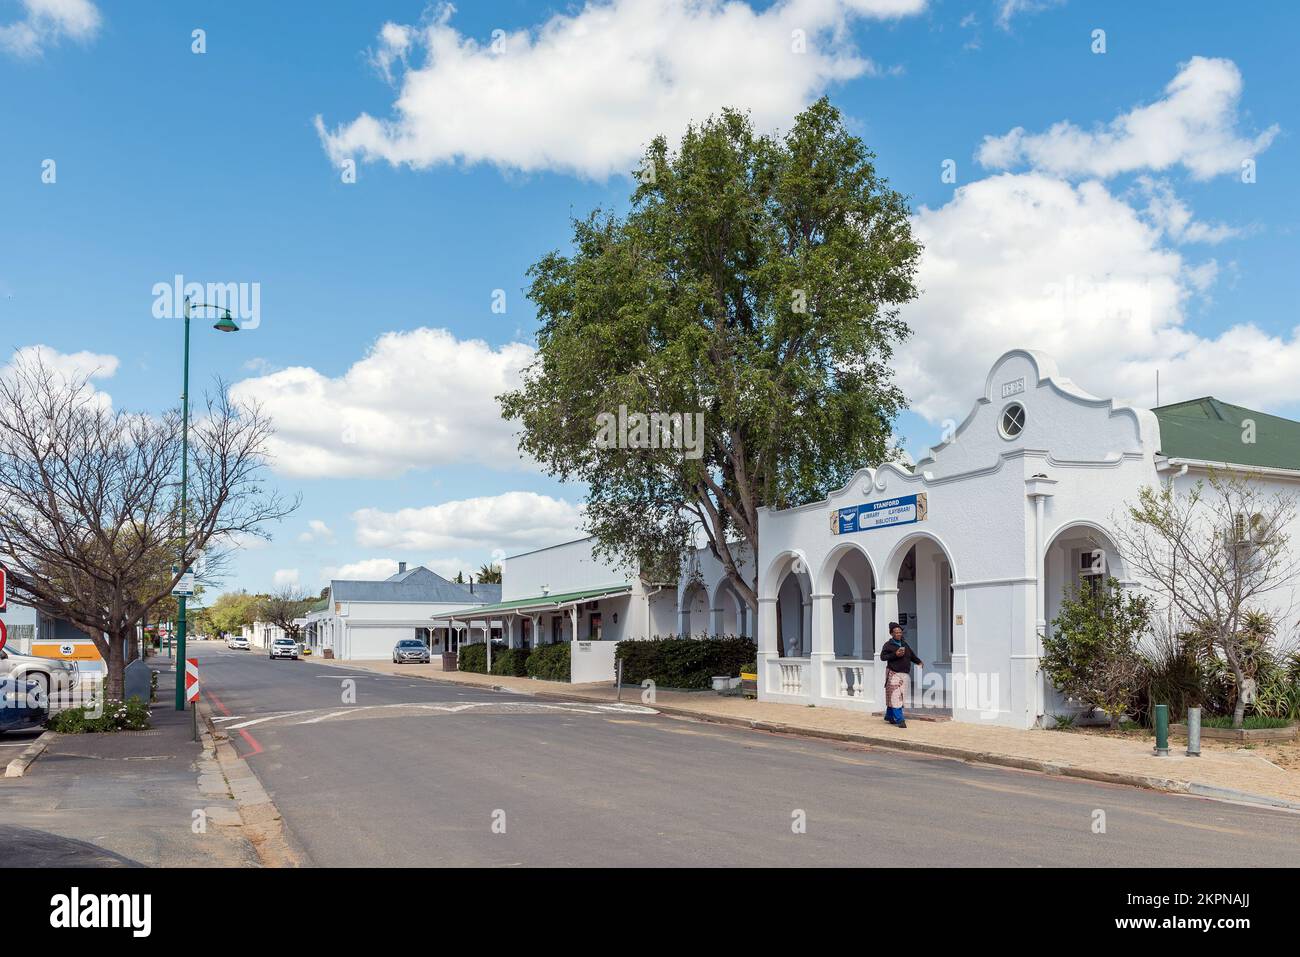 Stanford, South Africa - Sep 20, 2022: A street scene, with the historic library and other buildings, in Stanford in the Western Cape Province Stock Photo